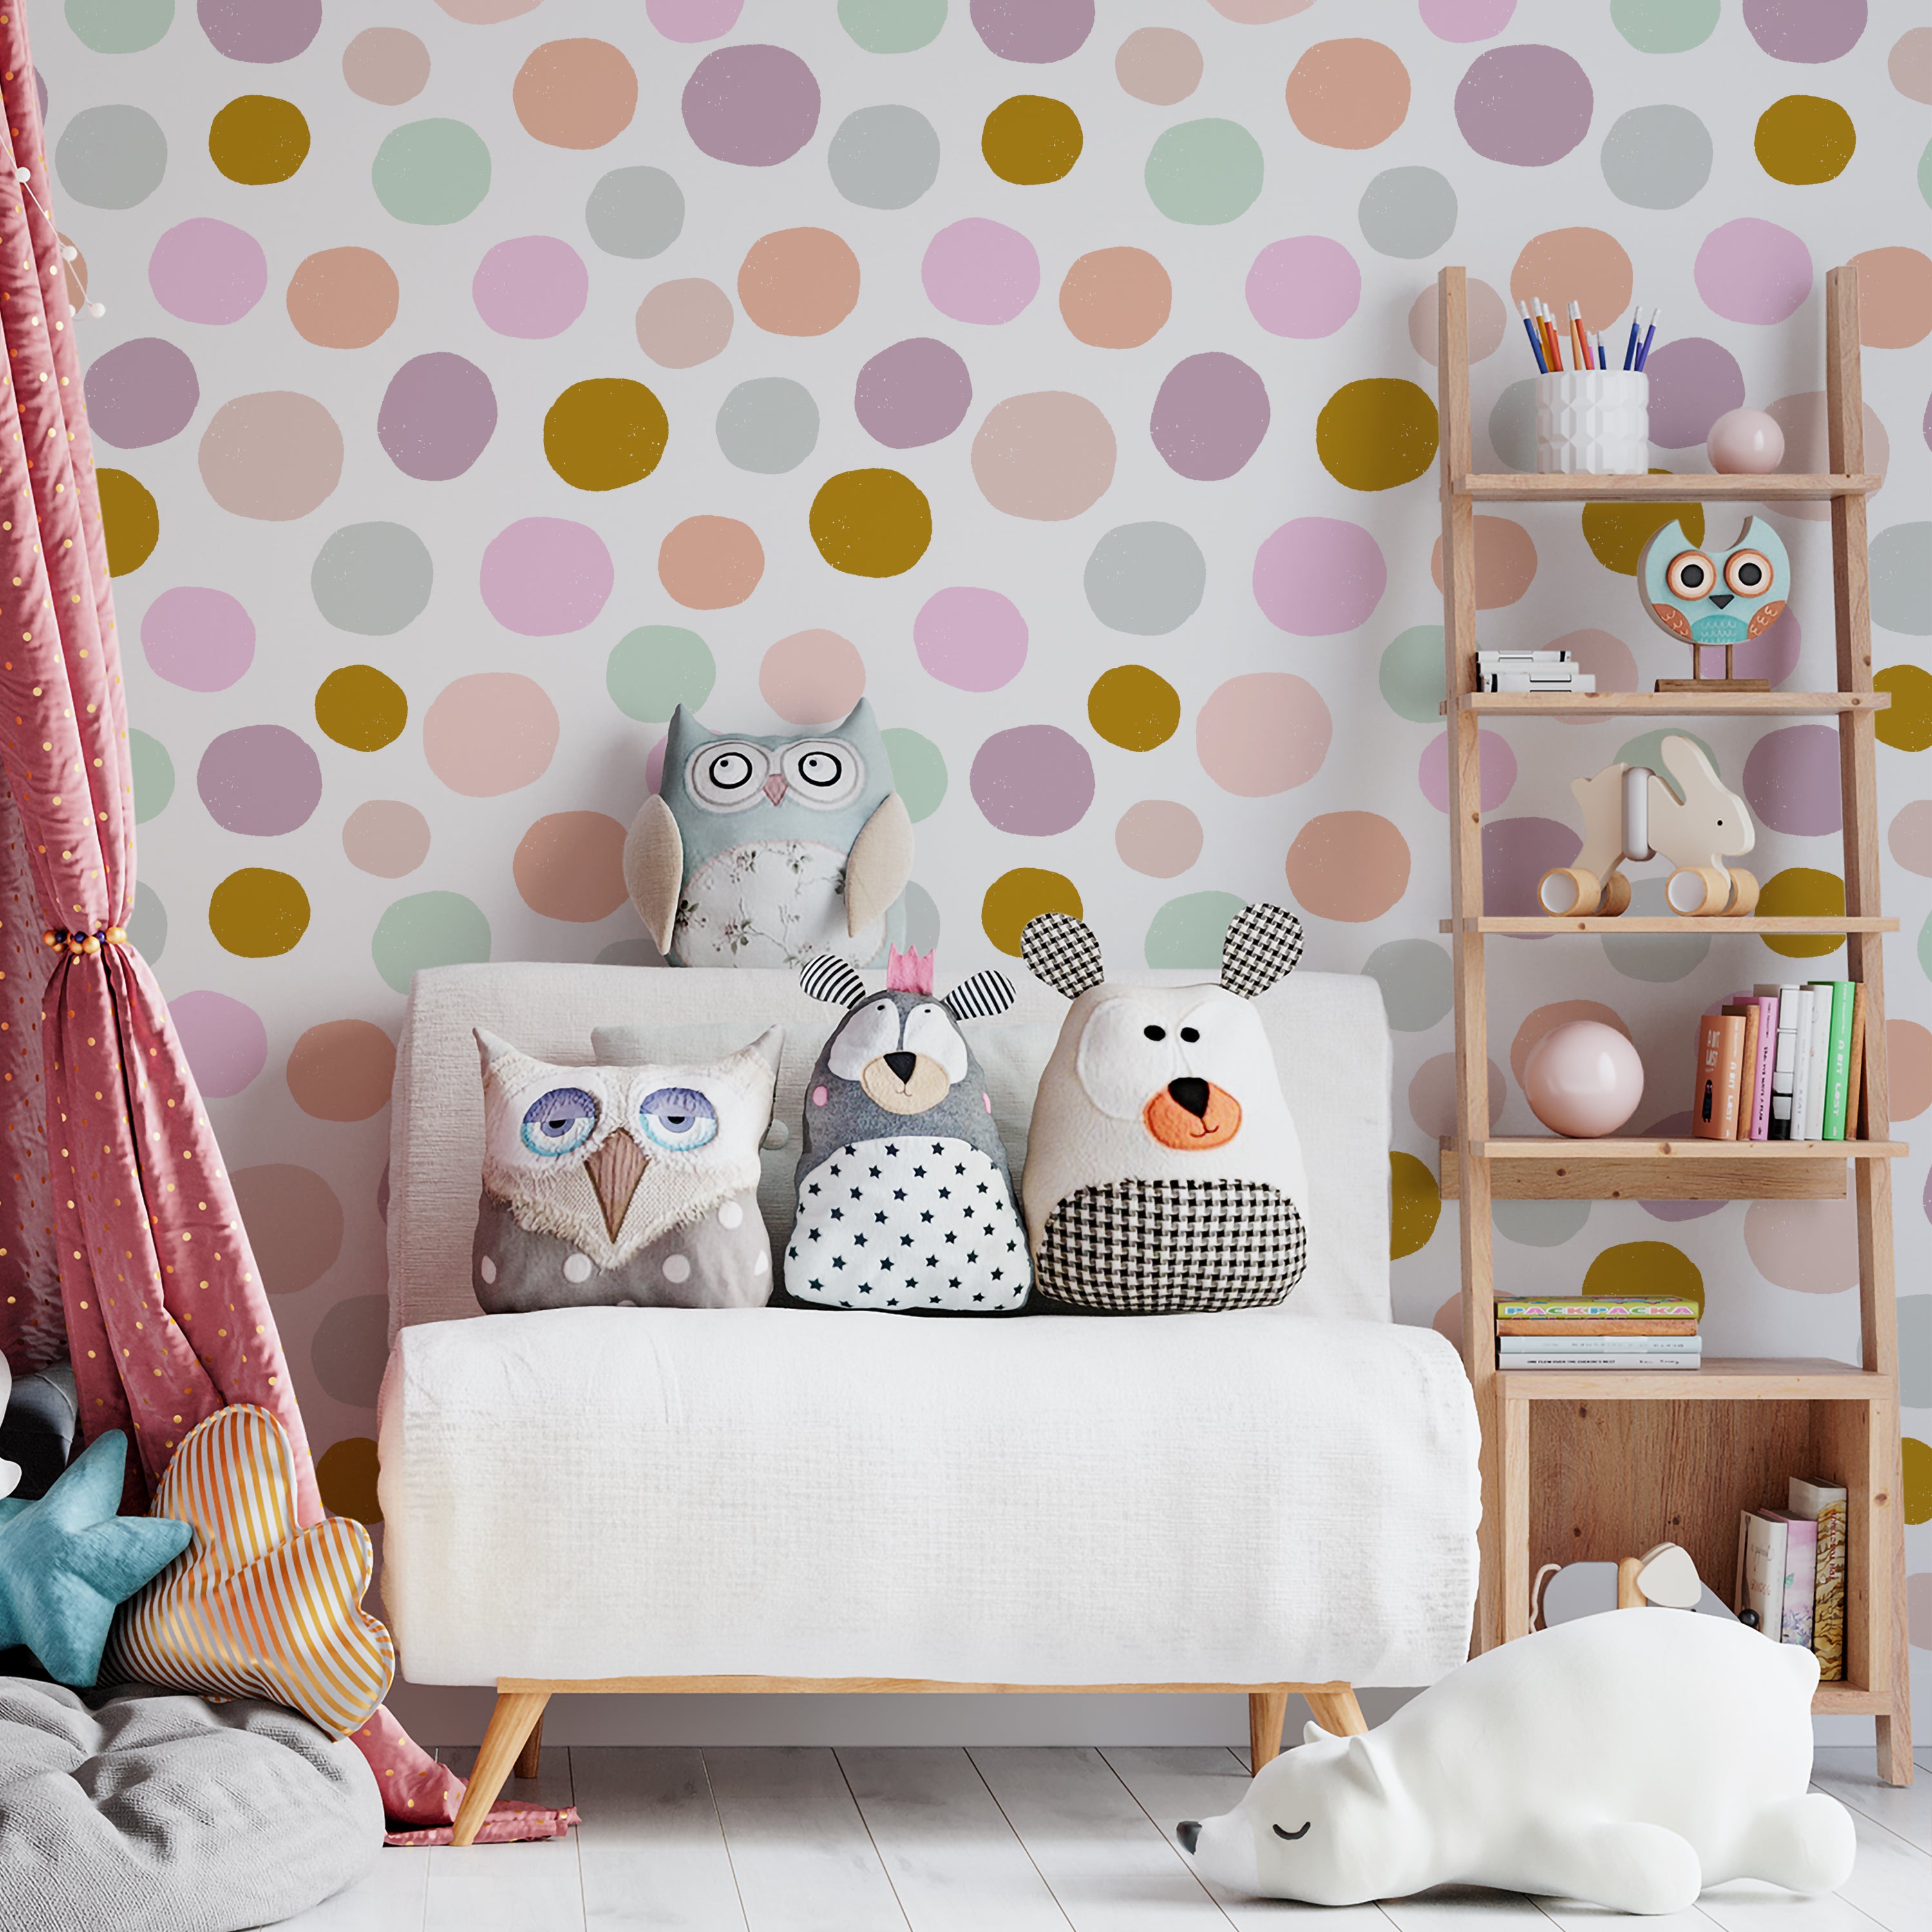 A children's room decorated with wallpaper that has a light, whimsical polka dot pattern in soft pastel colors, complementing a cozy reading nook with plush toys and a wooden shelf filled with books and play items.